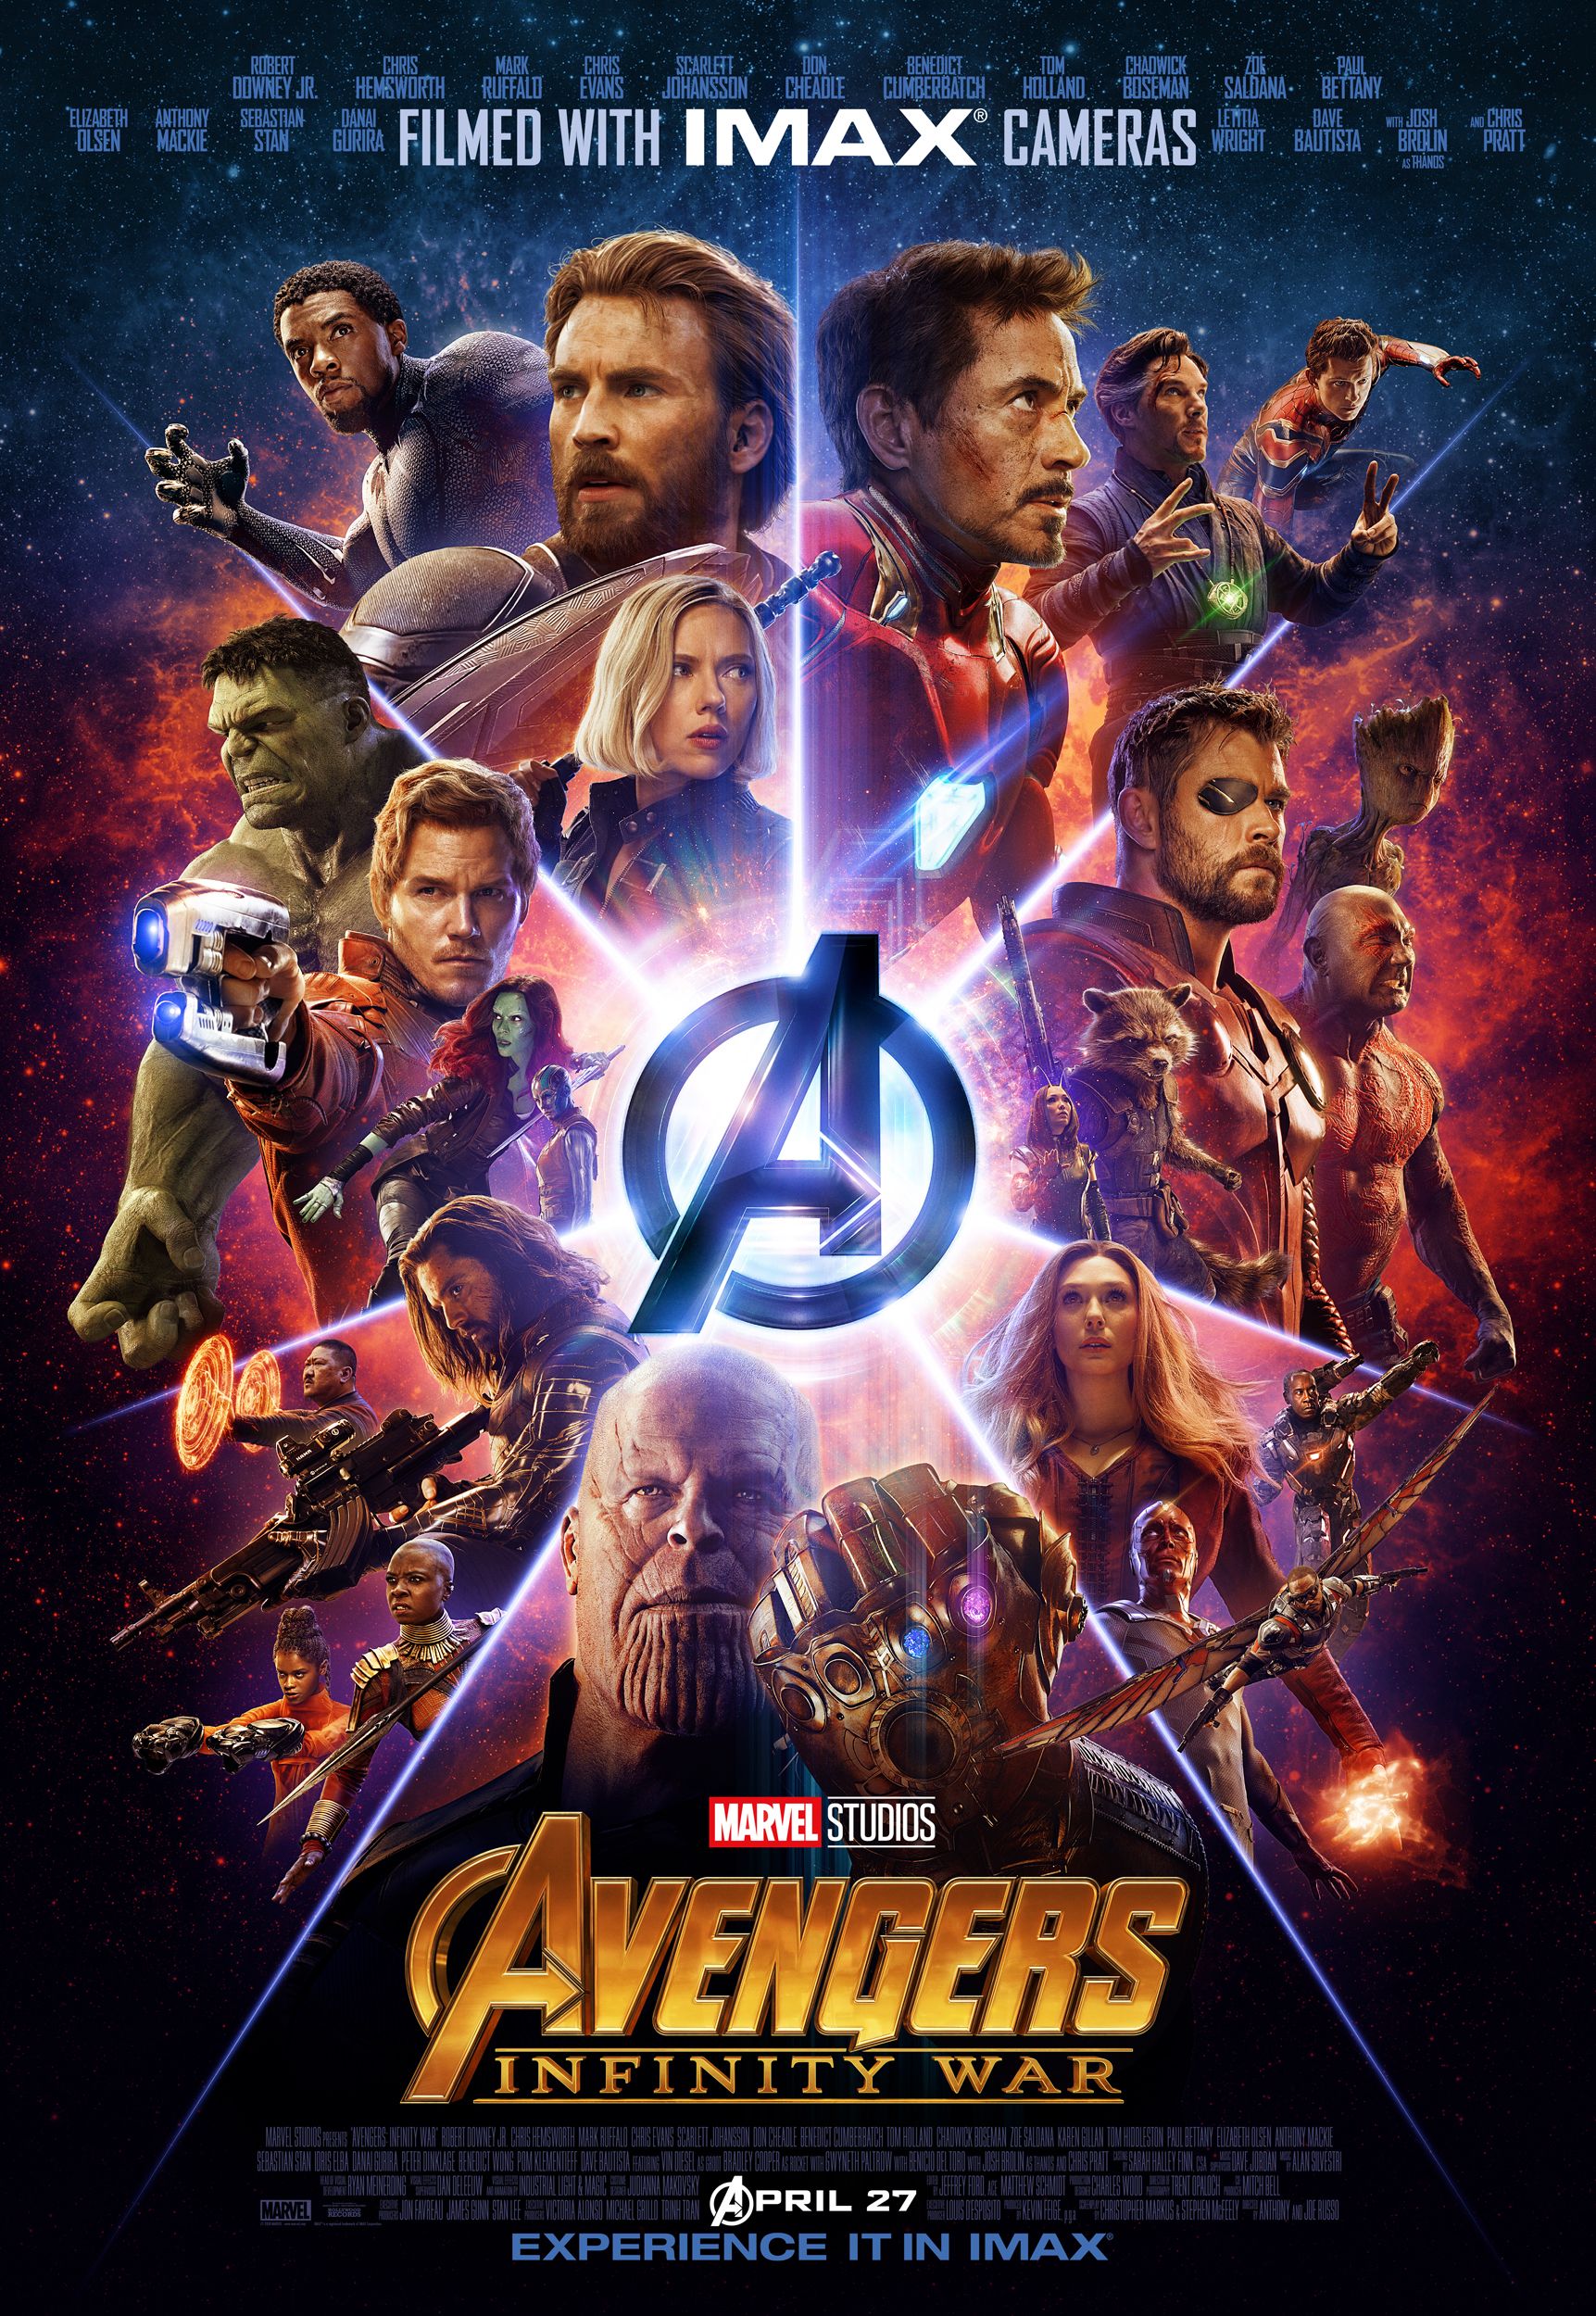 Infinity War IMAX Poster Hides Easter Eggs, No Hawkeye, Ant-Man | Collider1723 x 2500